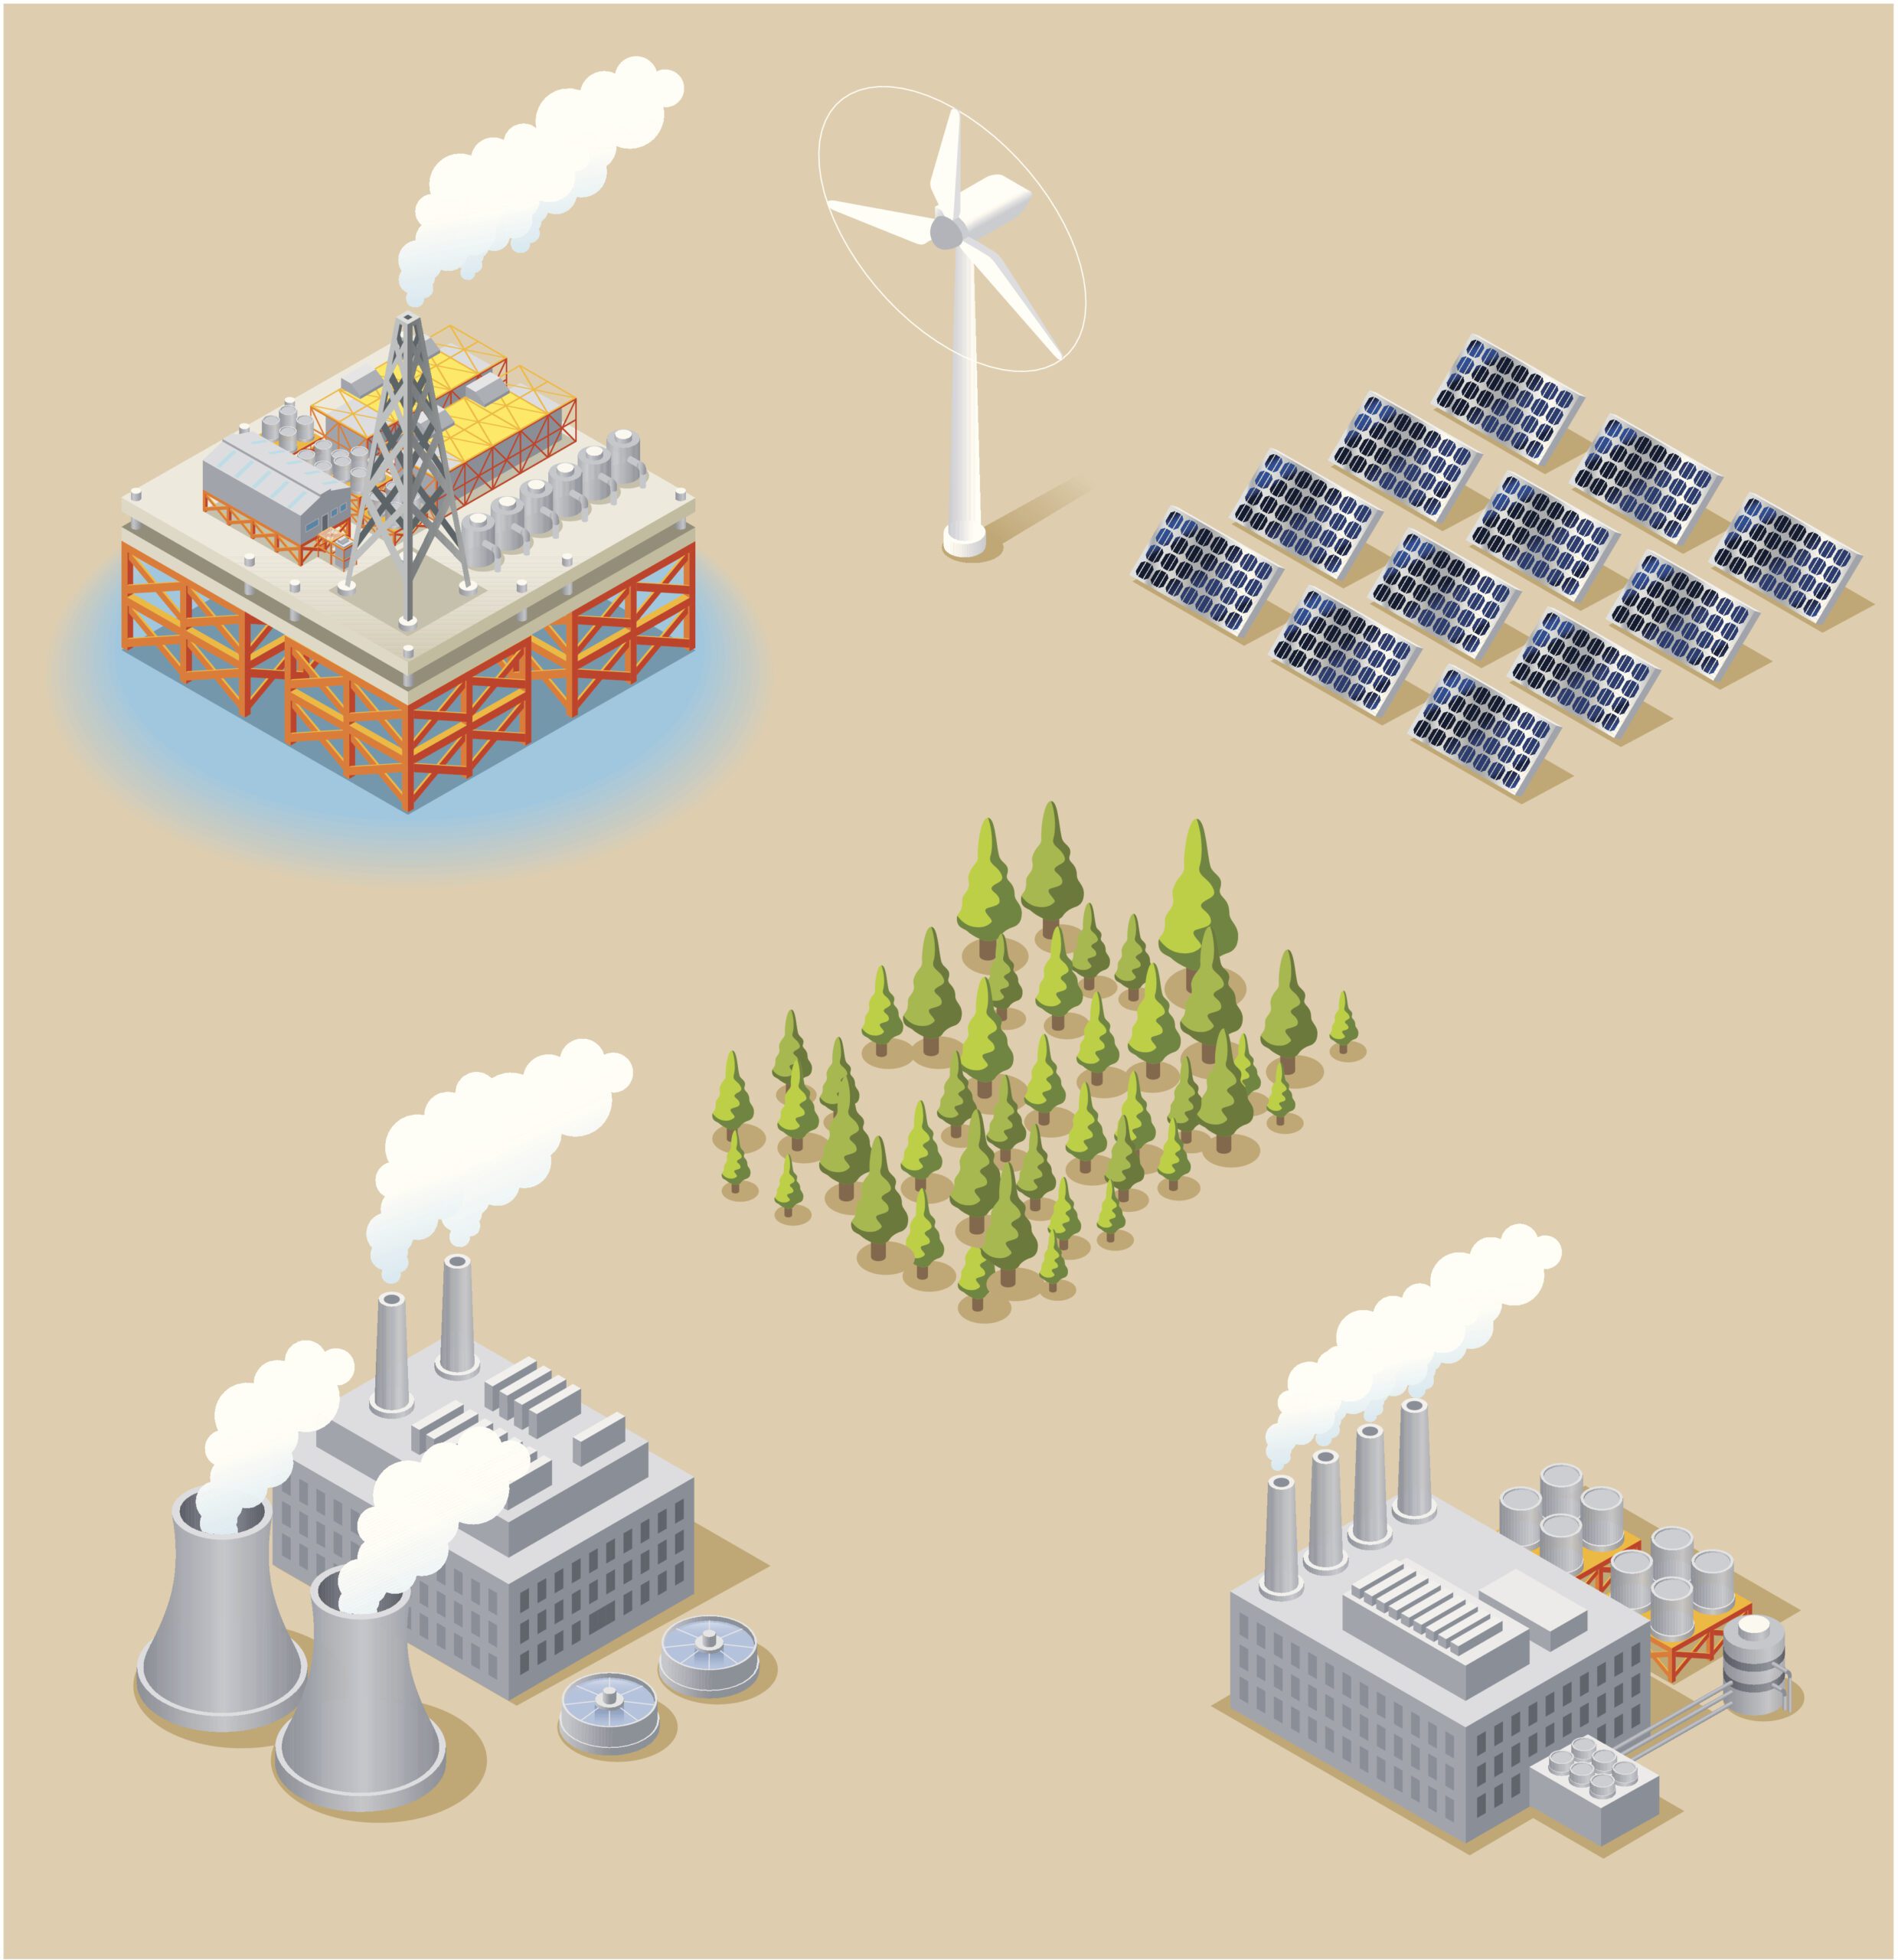 An infographic displaying various forms of energy production.